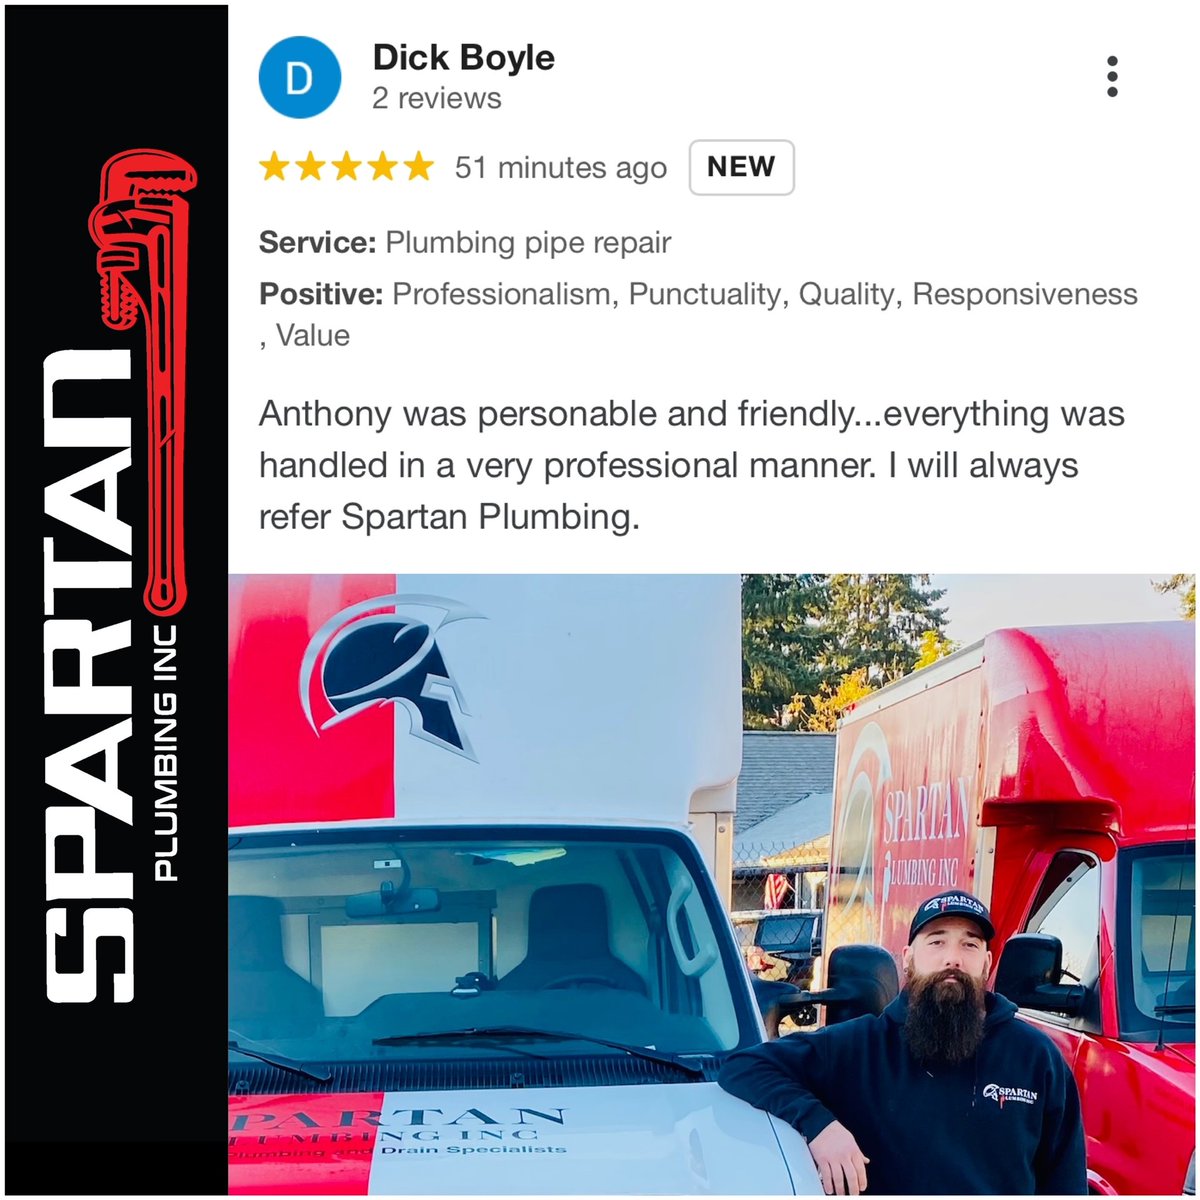 We have confidence in our dedication to delivering exceptional service & building lasting relationships based on mutual respect & transparency. 

#givespartanplumbingacall #tacomawa #emergencyplumber #reviewusongoogle